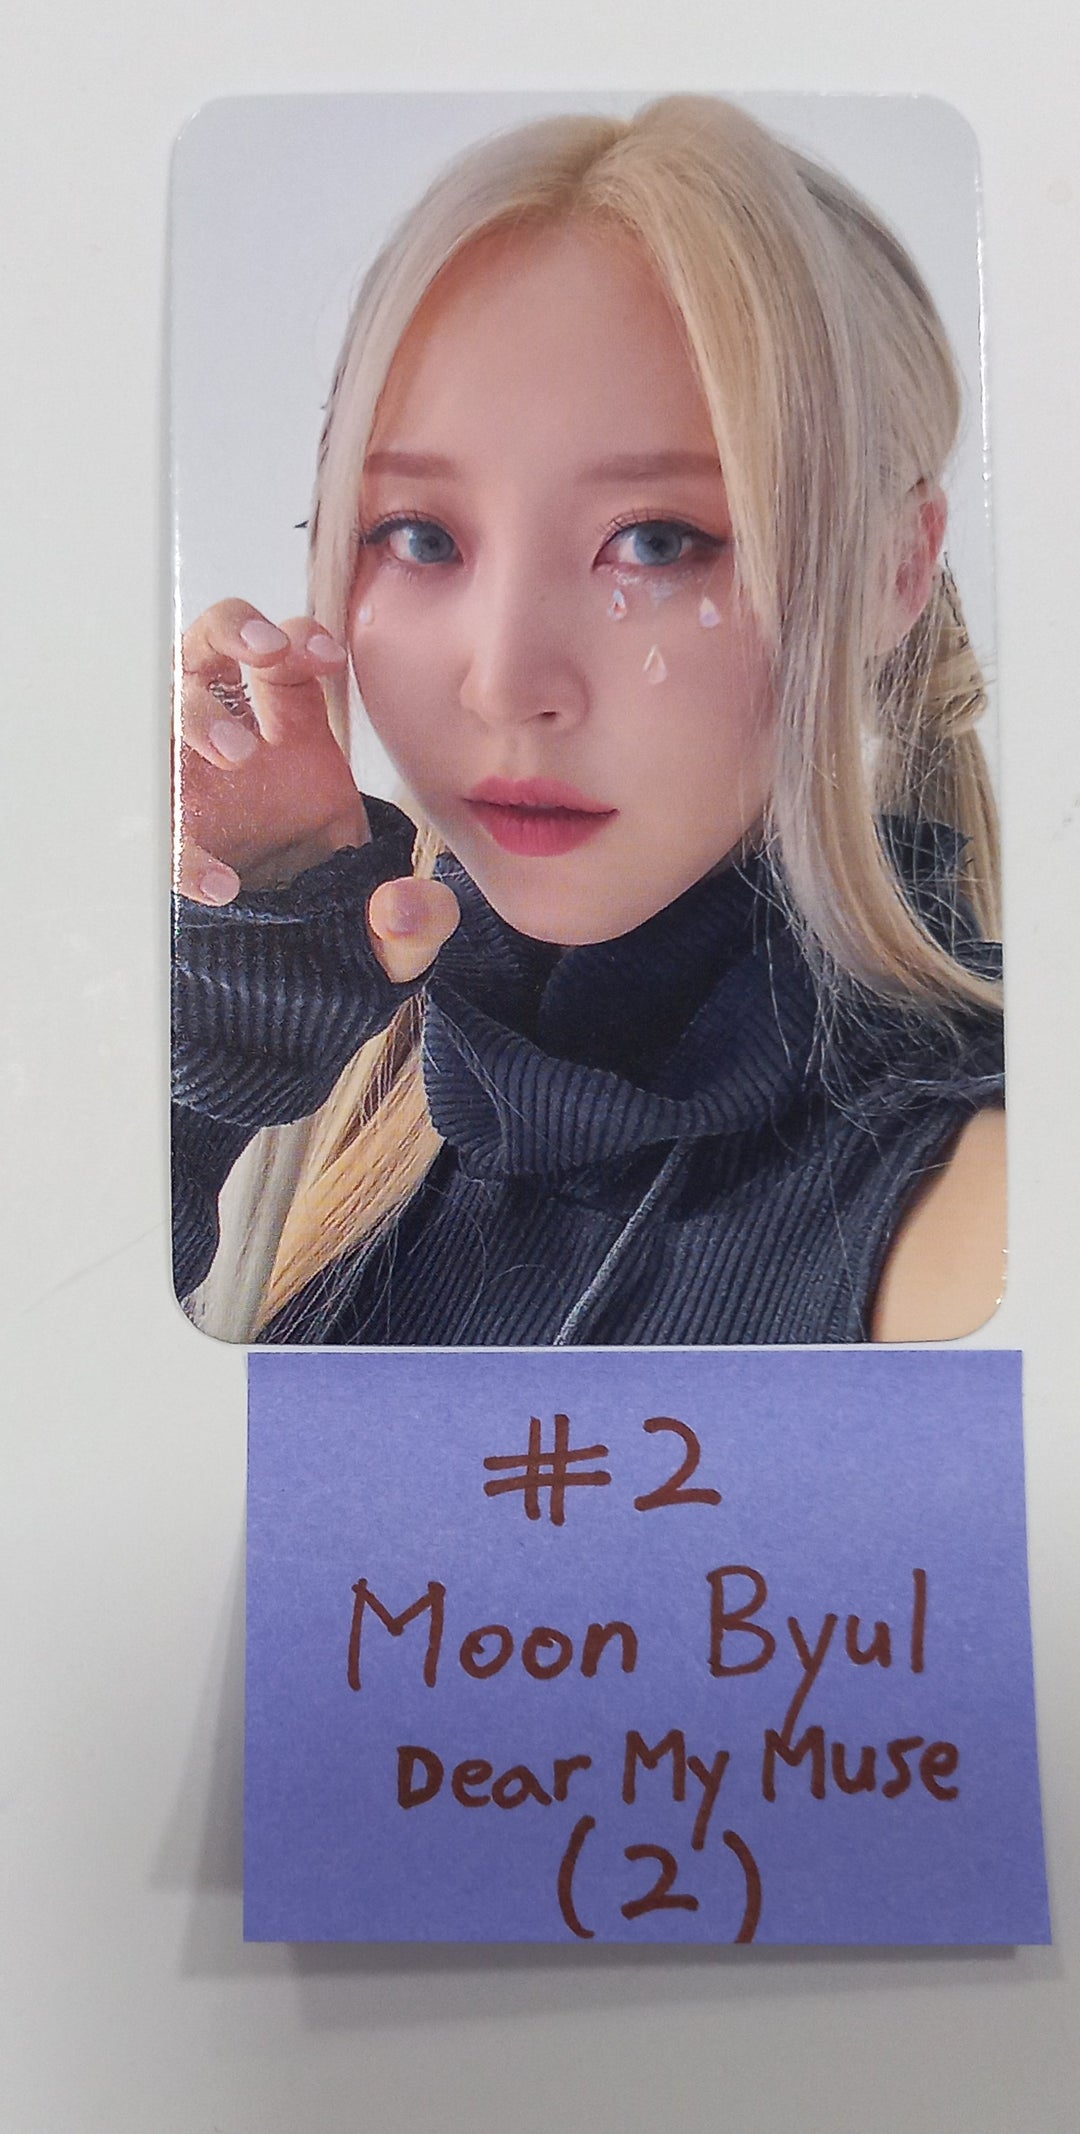 MOONBYUL "Starlit of Muse" - Dear My Muse Pre-Order Benefit Photocard [Museum Ver.] [24.2.22]